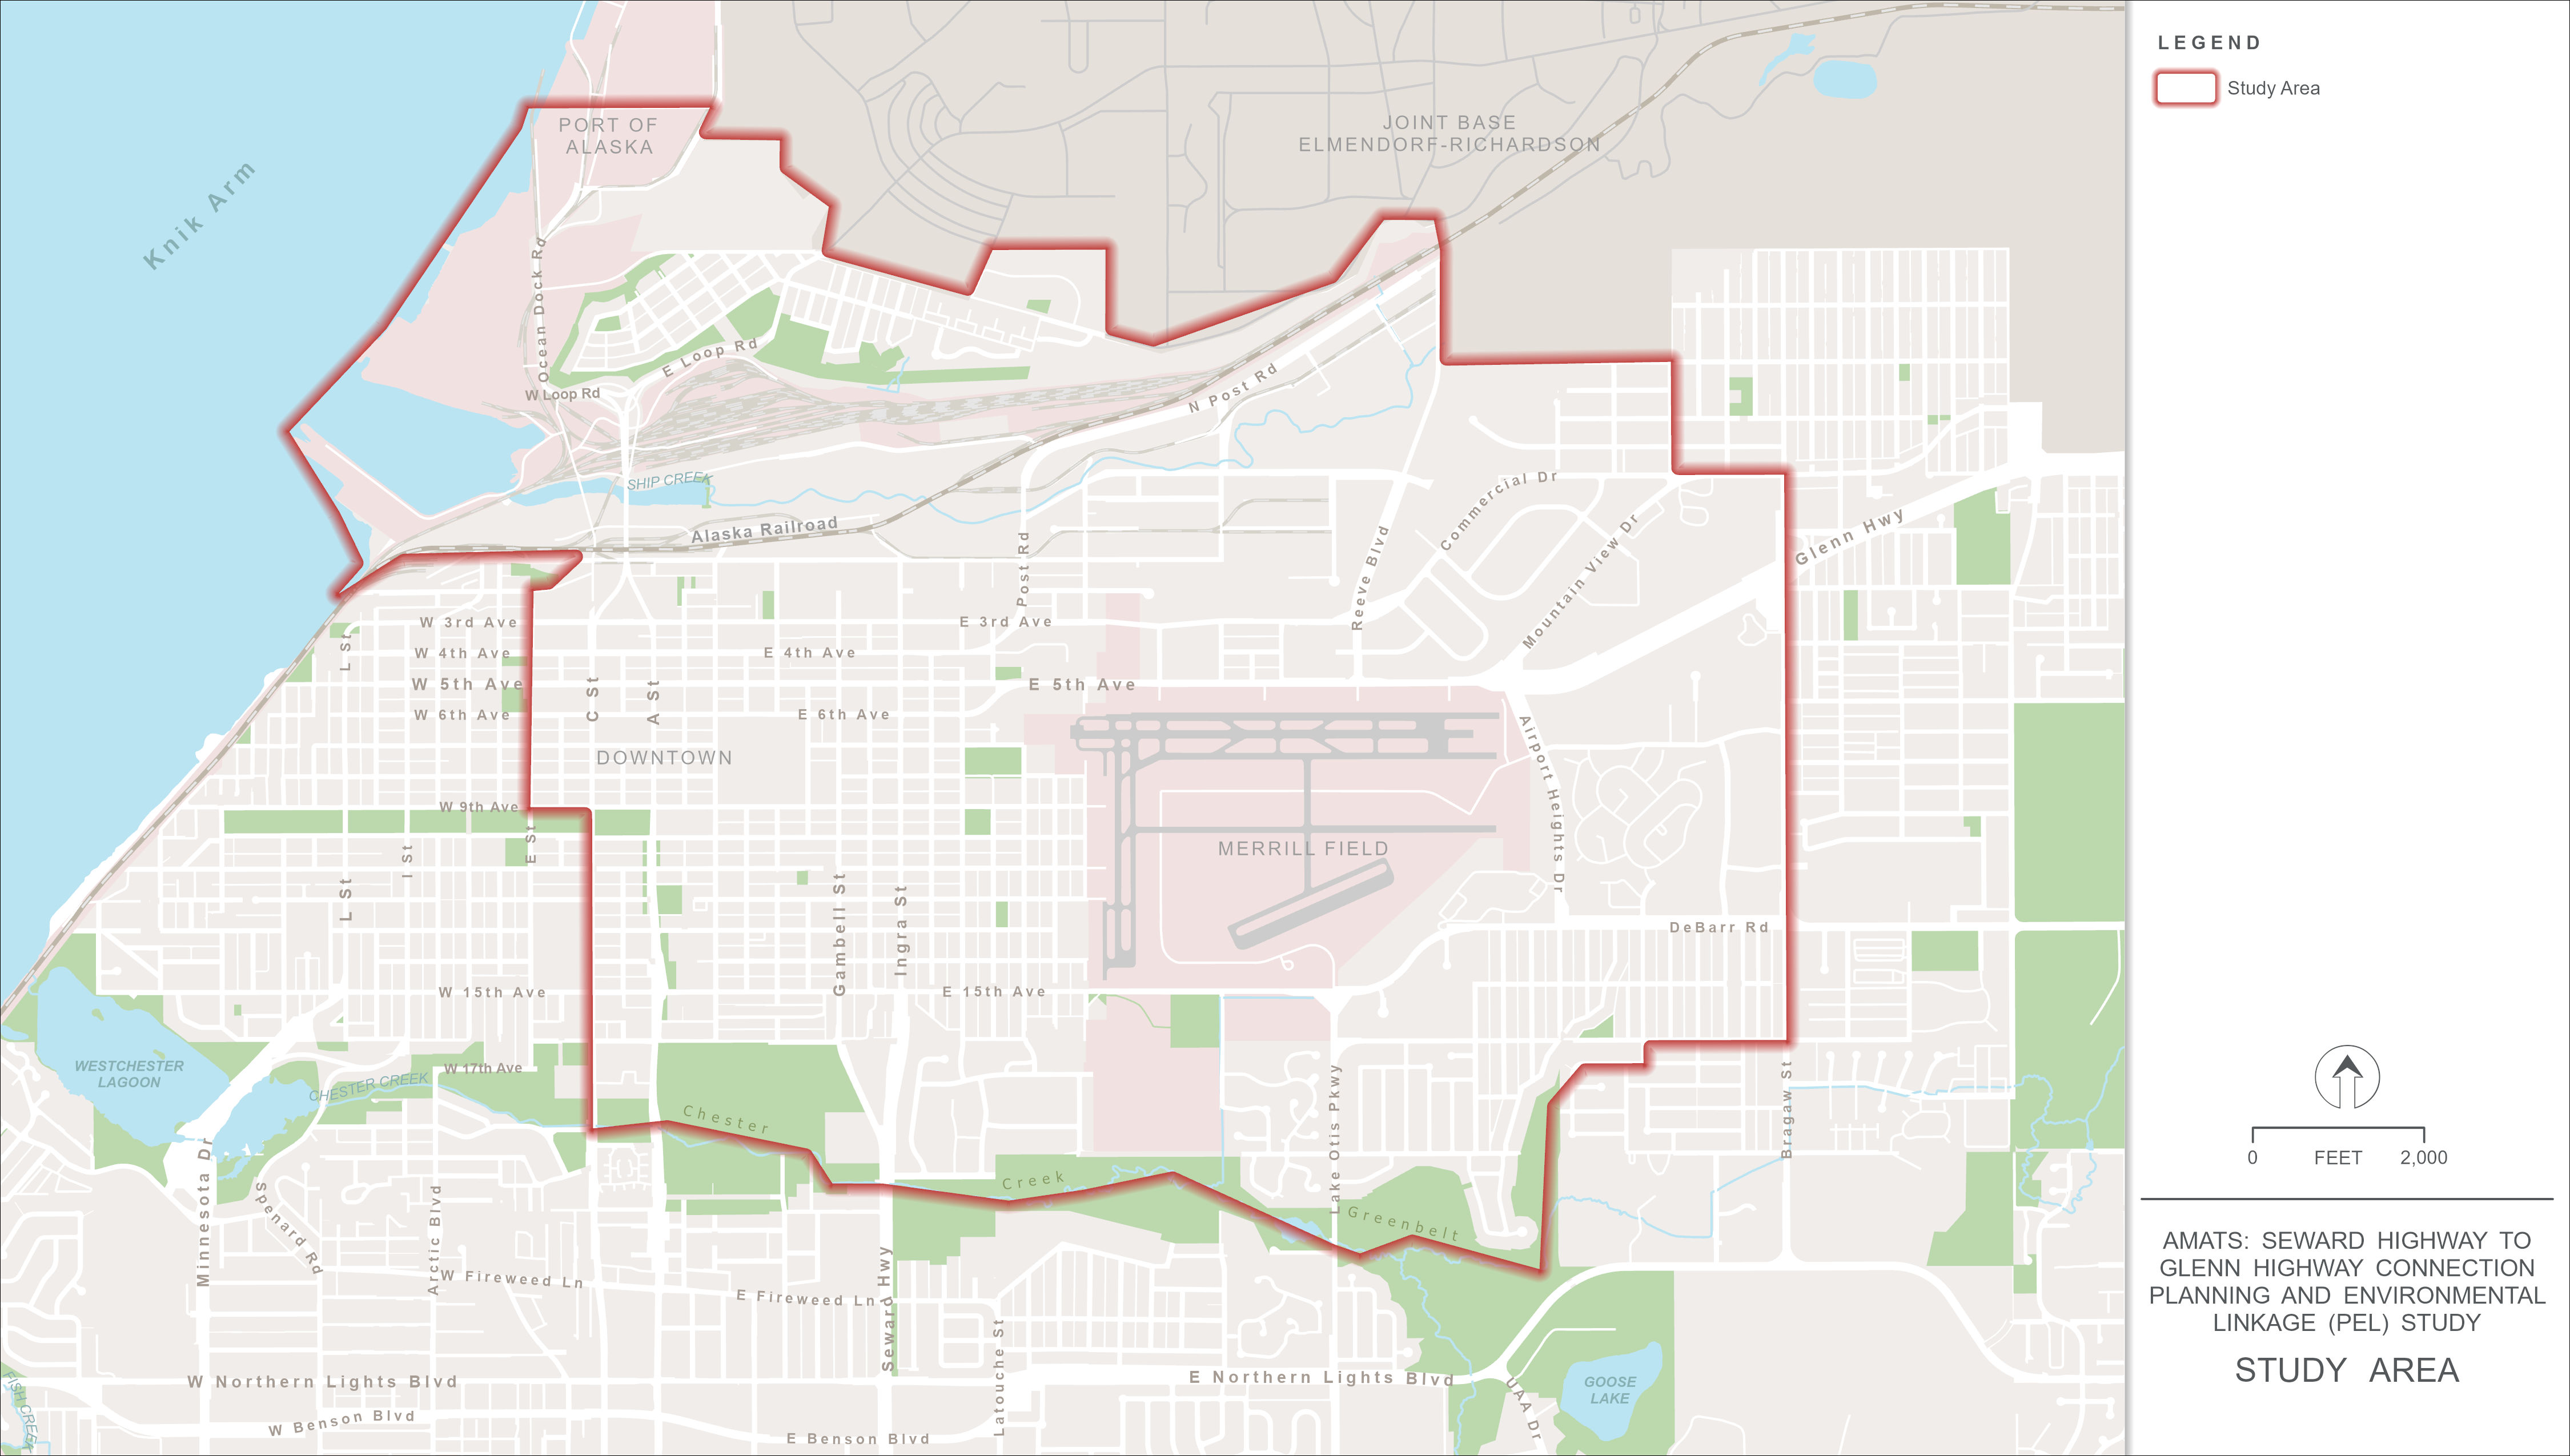 A map shows a red border marking the project area in Anchorage. The area includes the Port of Alaska, Downtown, and Merrill Field. It also includes portions of many roads, such as Glenn Highway on the east side of the map and Seward Highway in the south side.